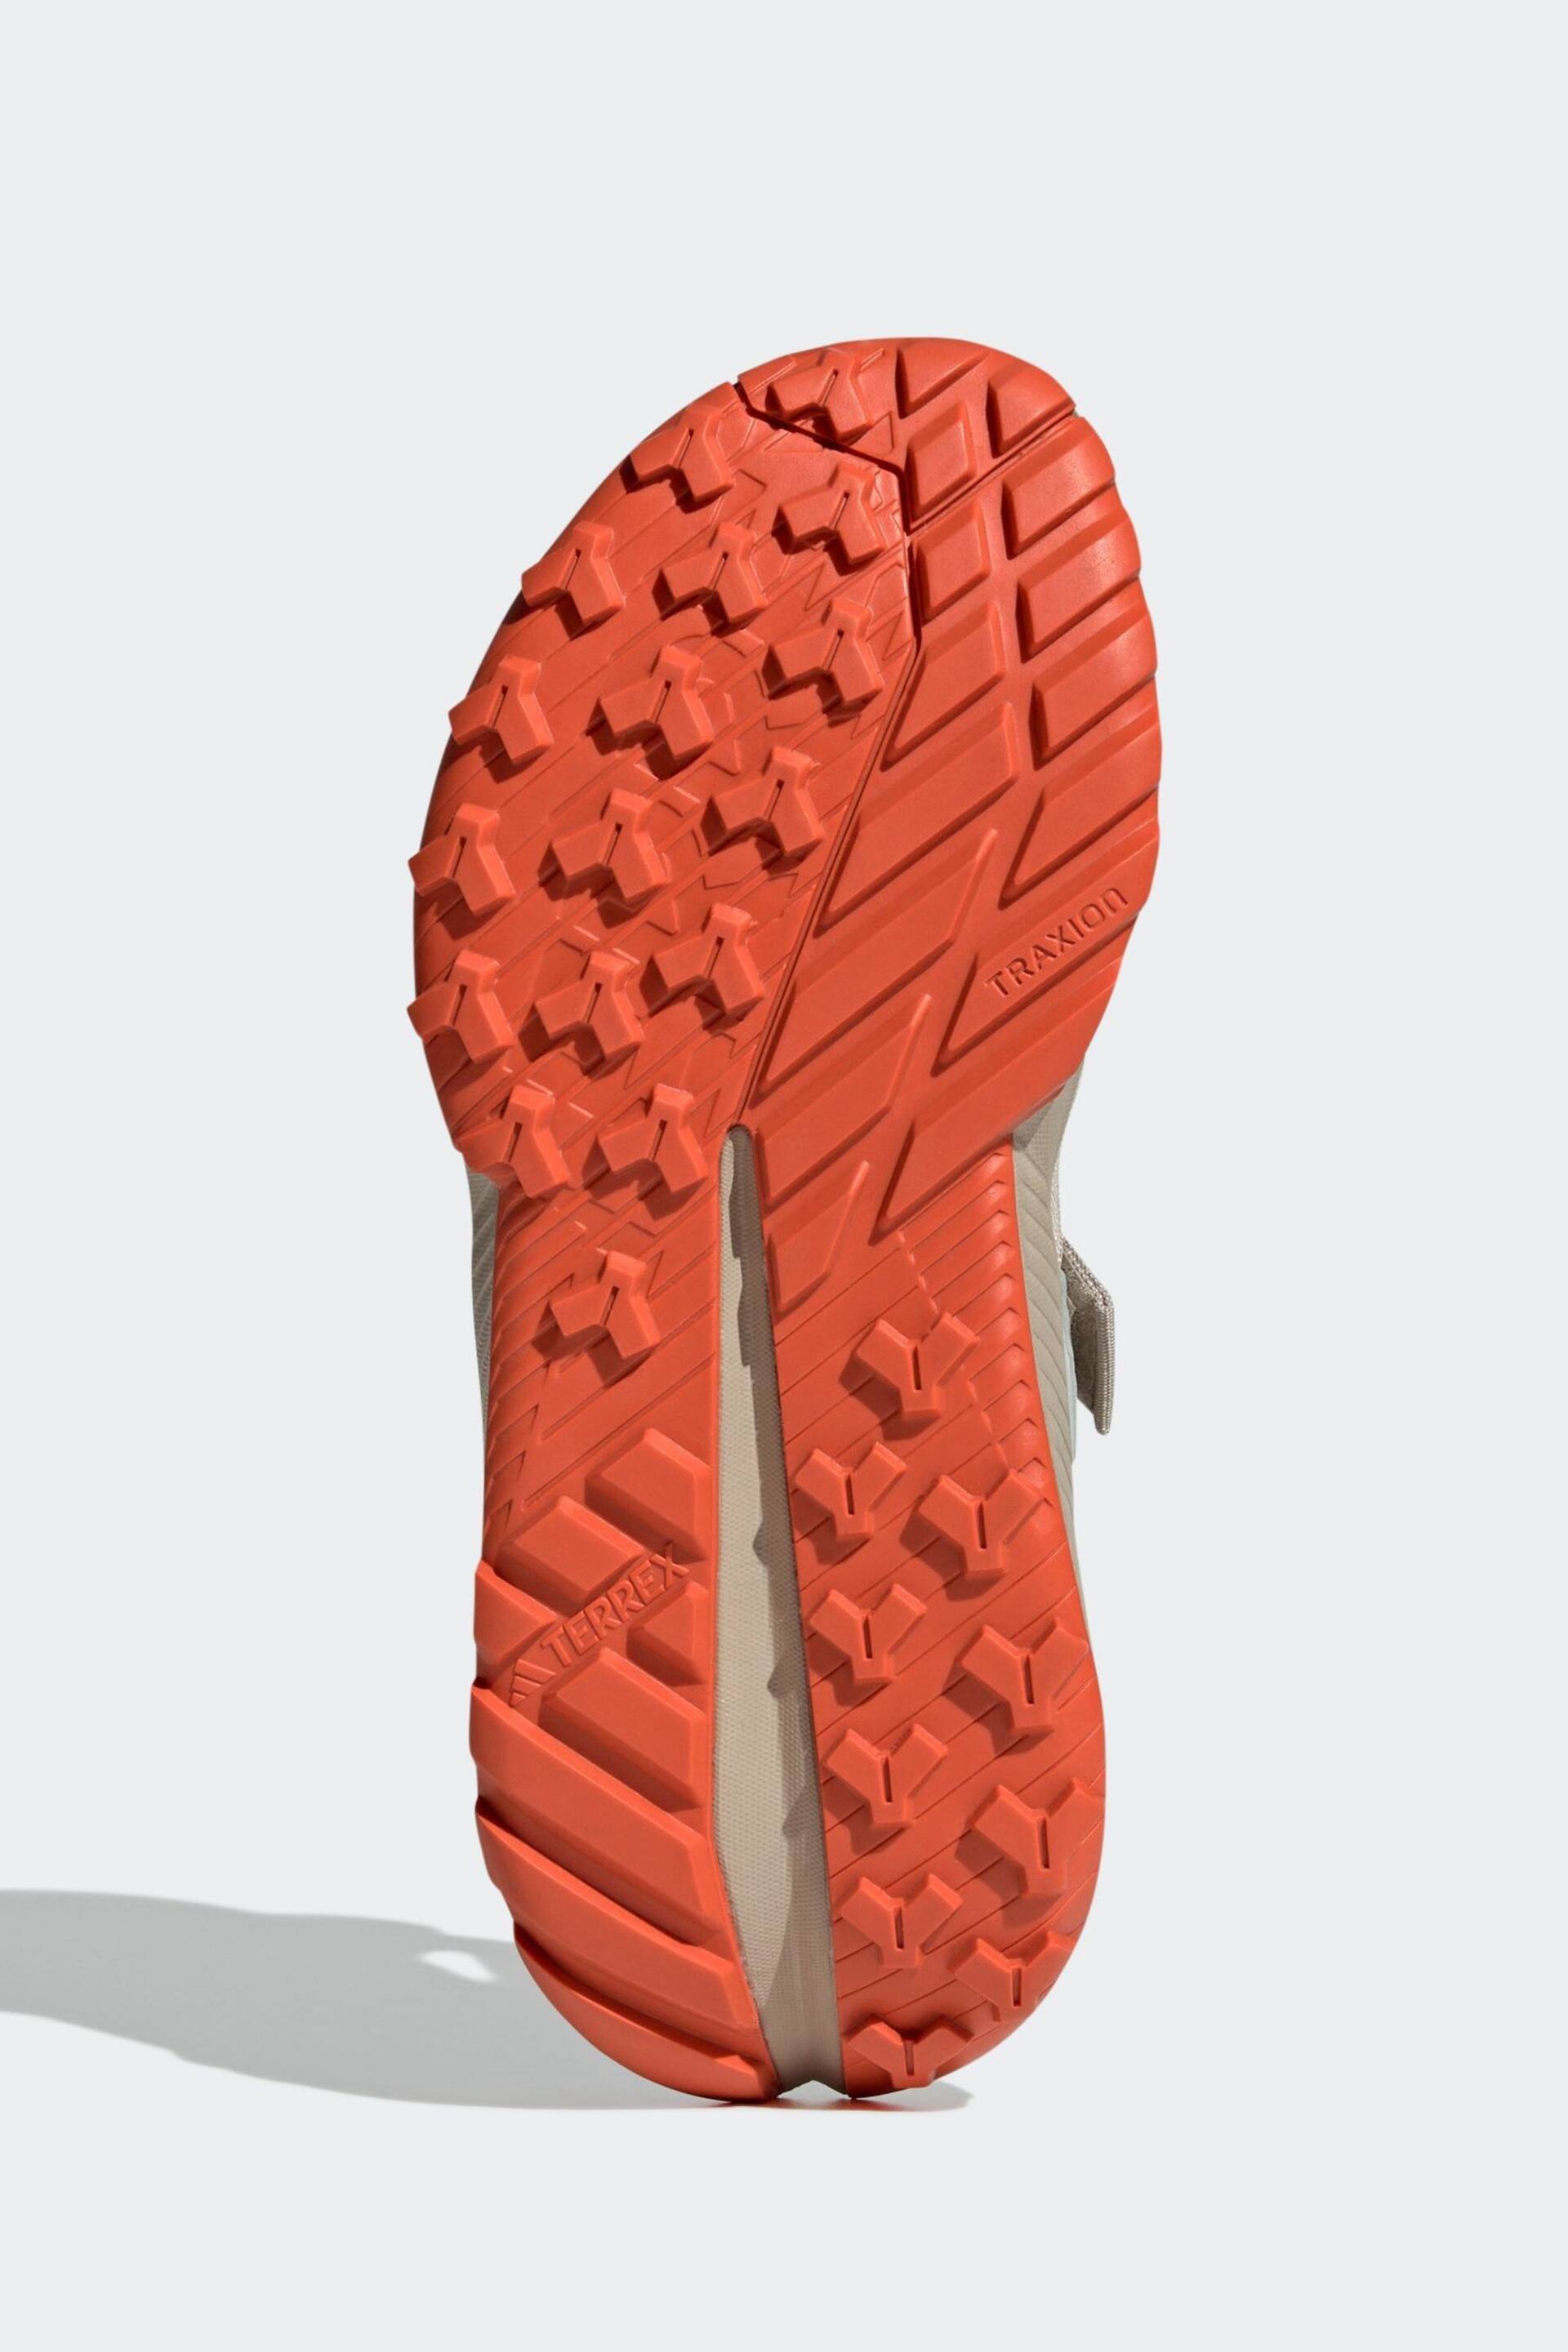 adidas Terrex Hydroterra At Sandals - Image 7 of 9